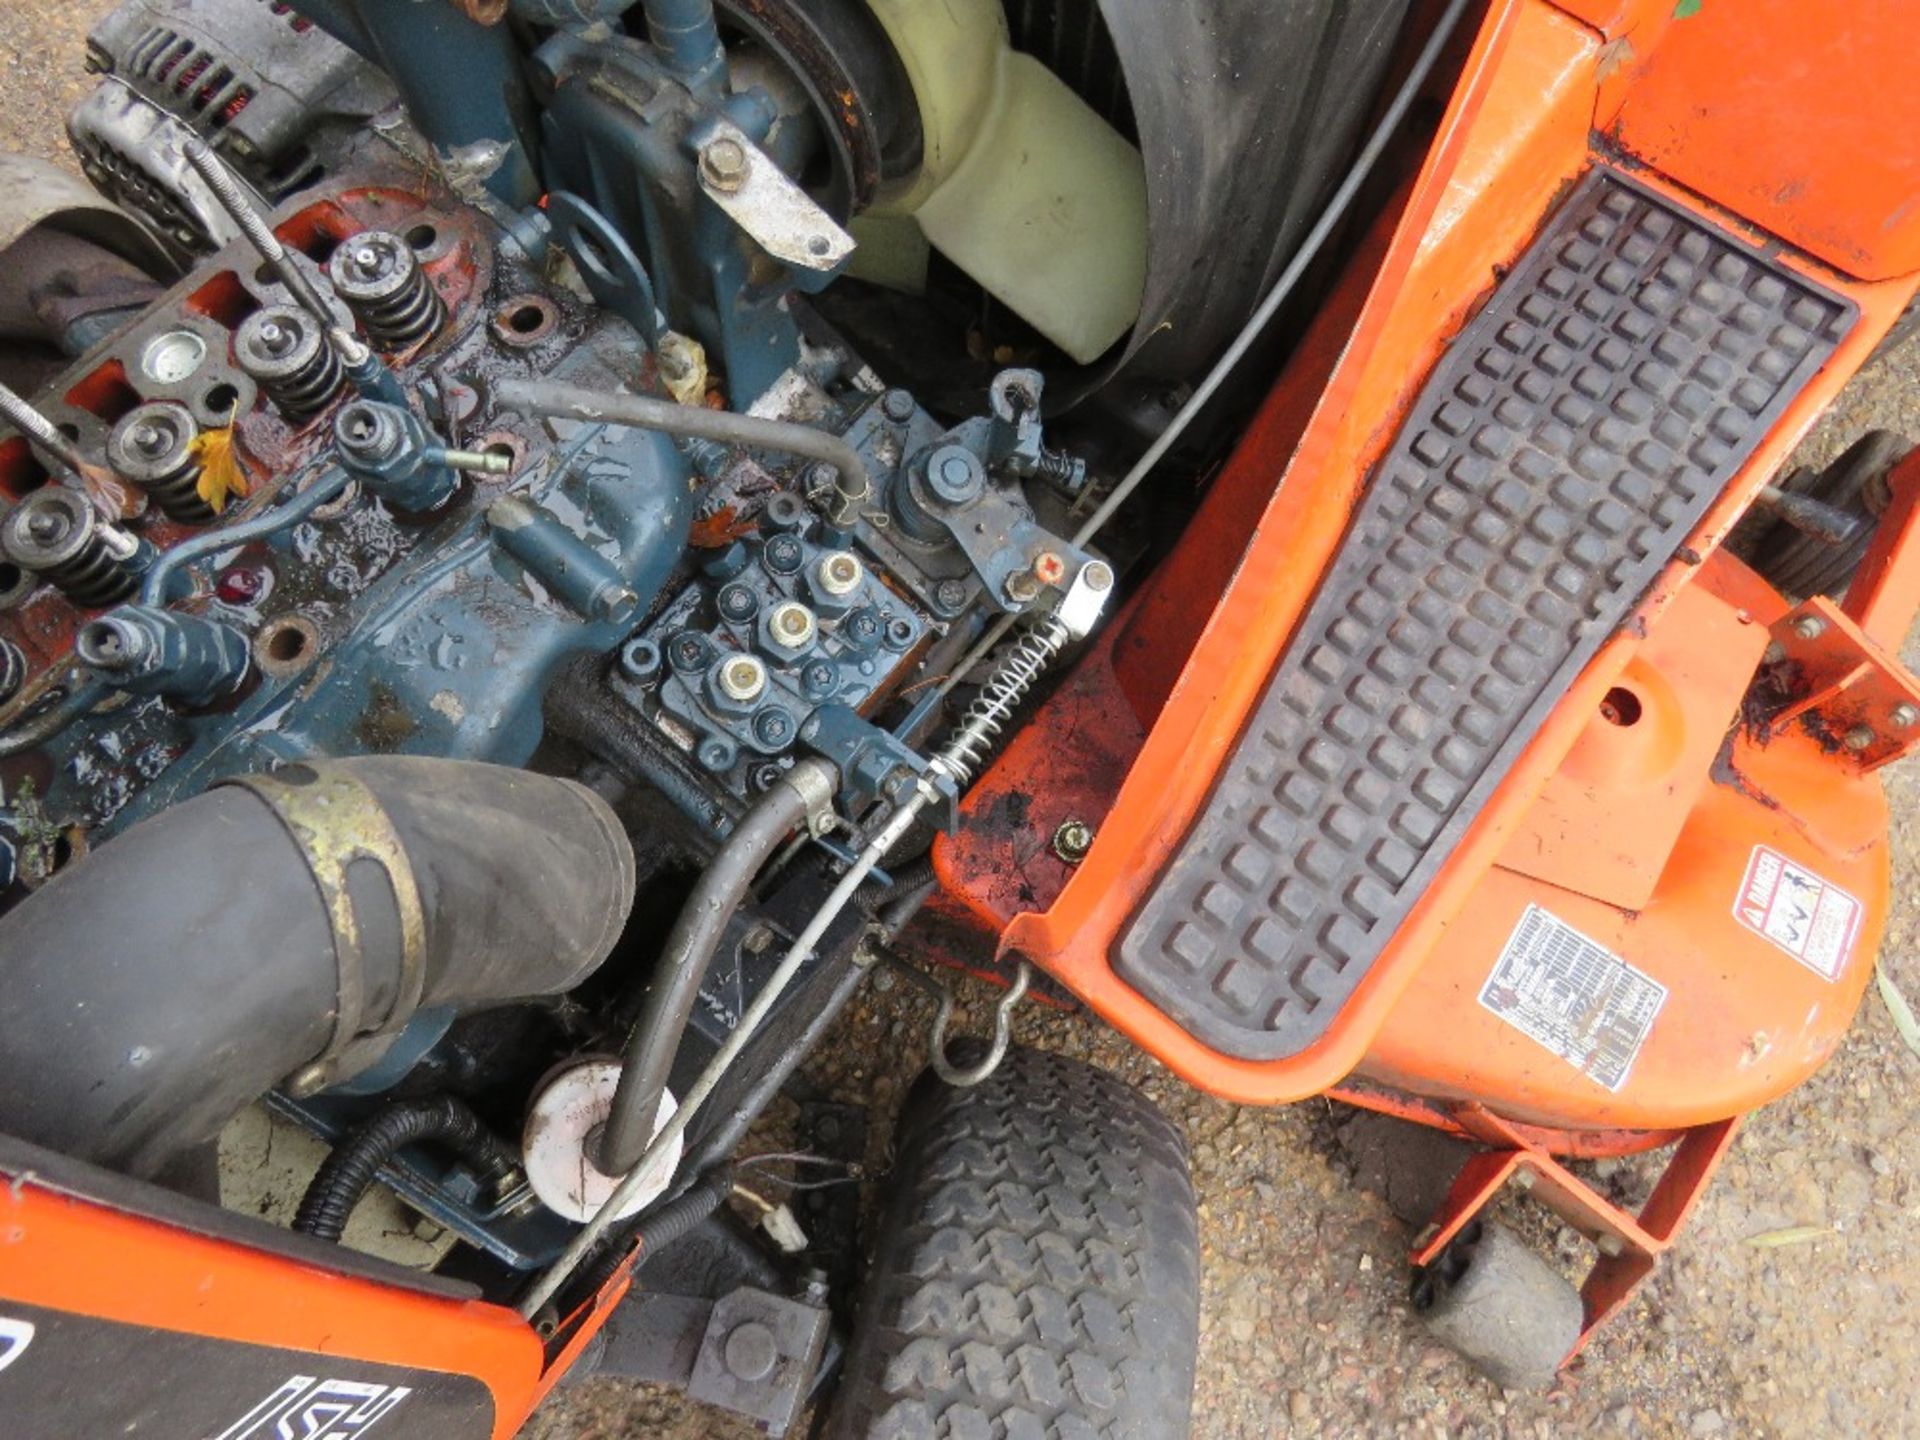 KUBOTA G1700 HST DIESEL RIDE ON MOWER. ENGINE PARTLY STRIPPED, AS SHOWN, SOLD AS UNTESTED/SPARES/REP - Image 8 of 8